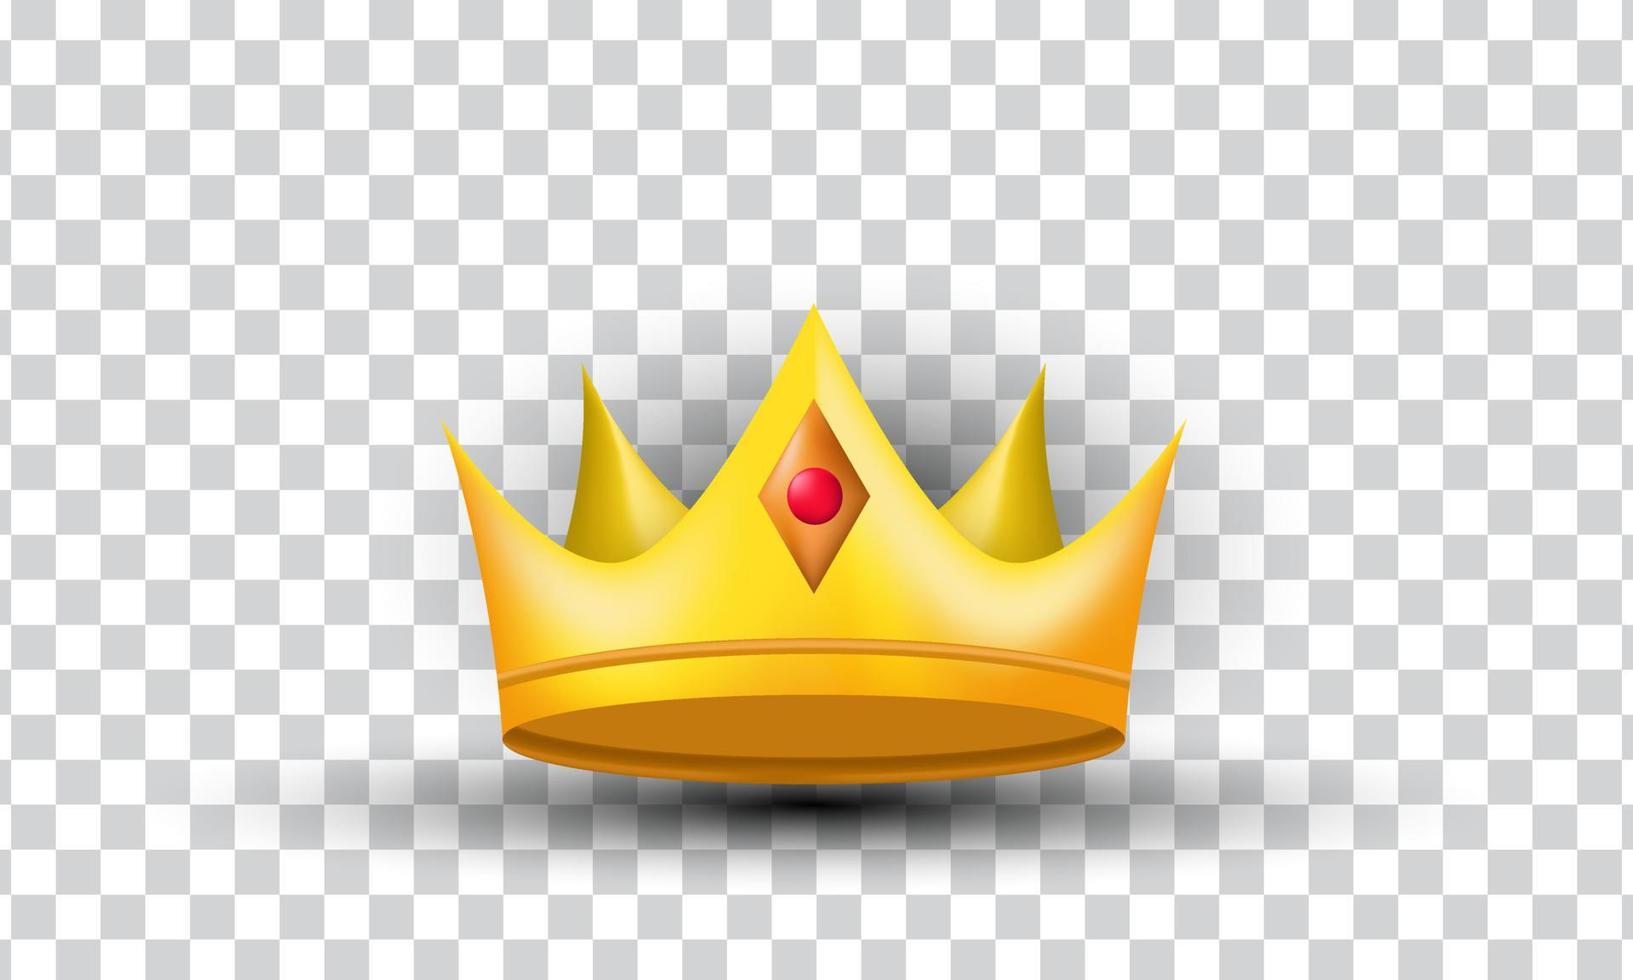 unique vector 3d style gold diamond red crown realistic icon design isolated on